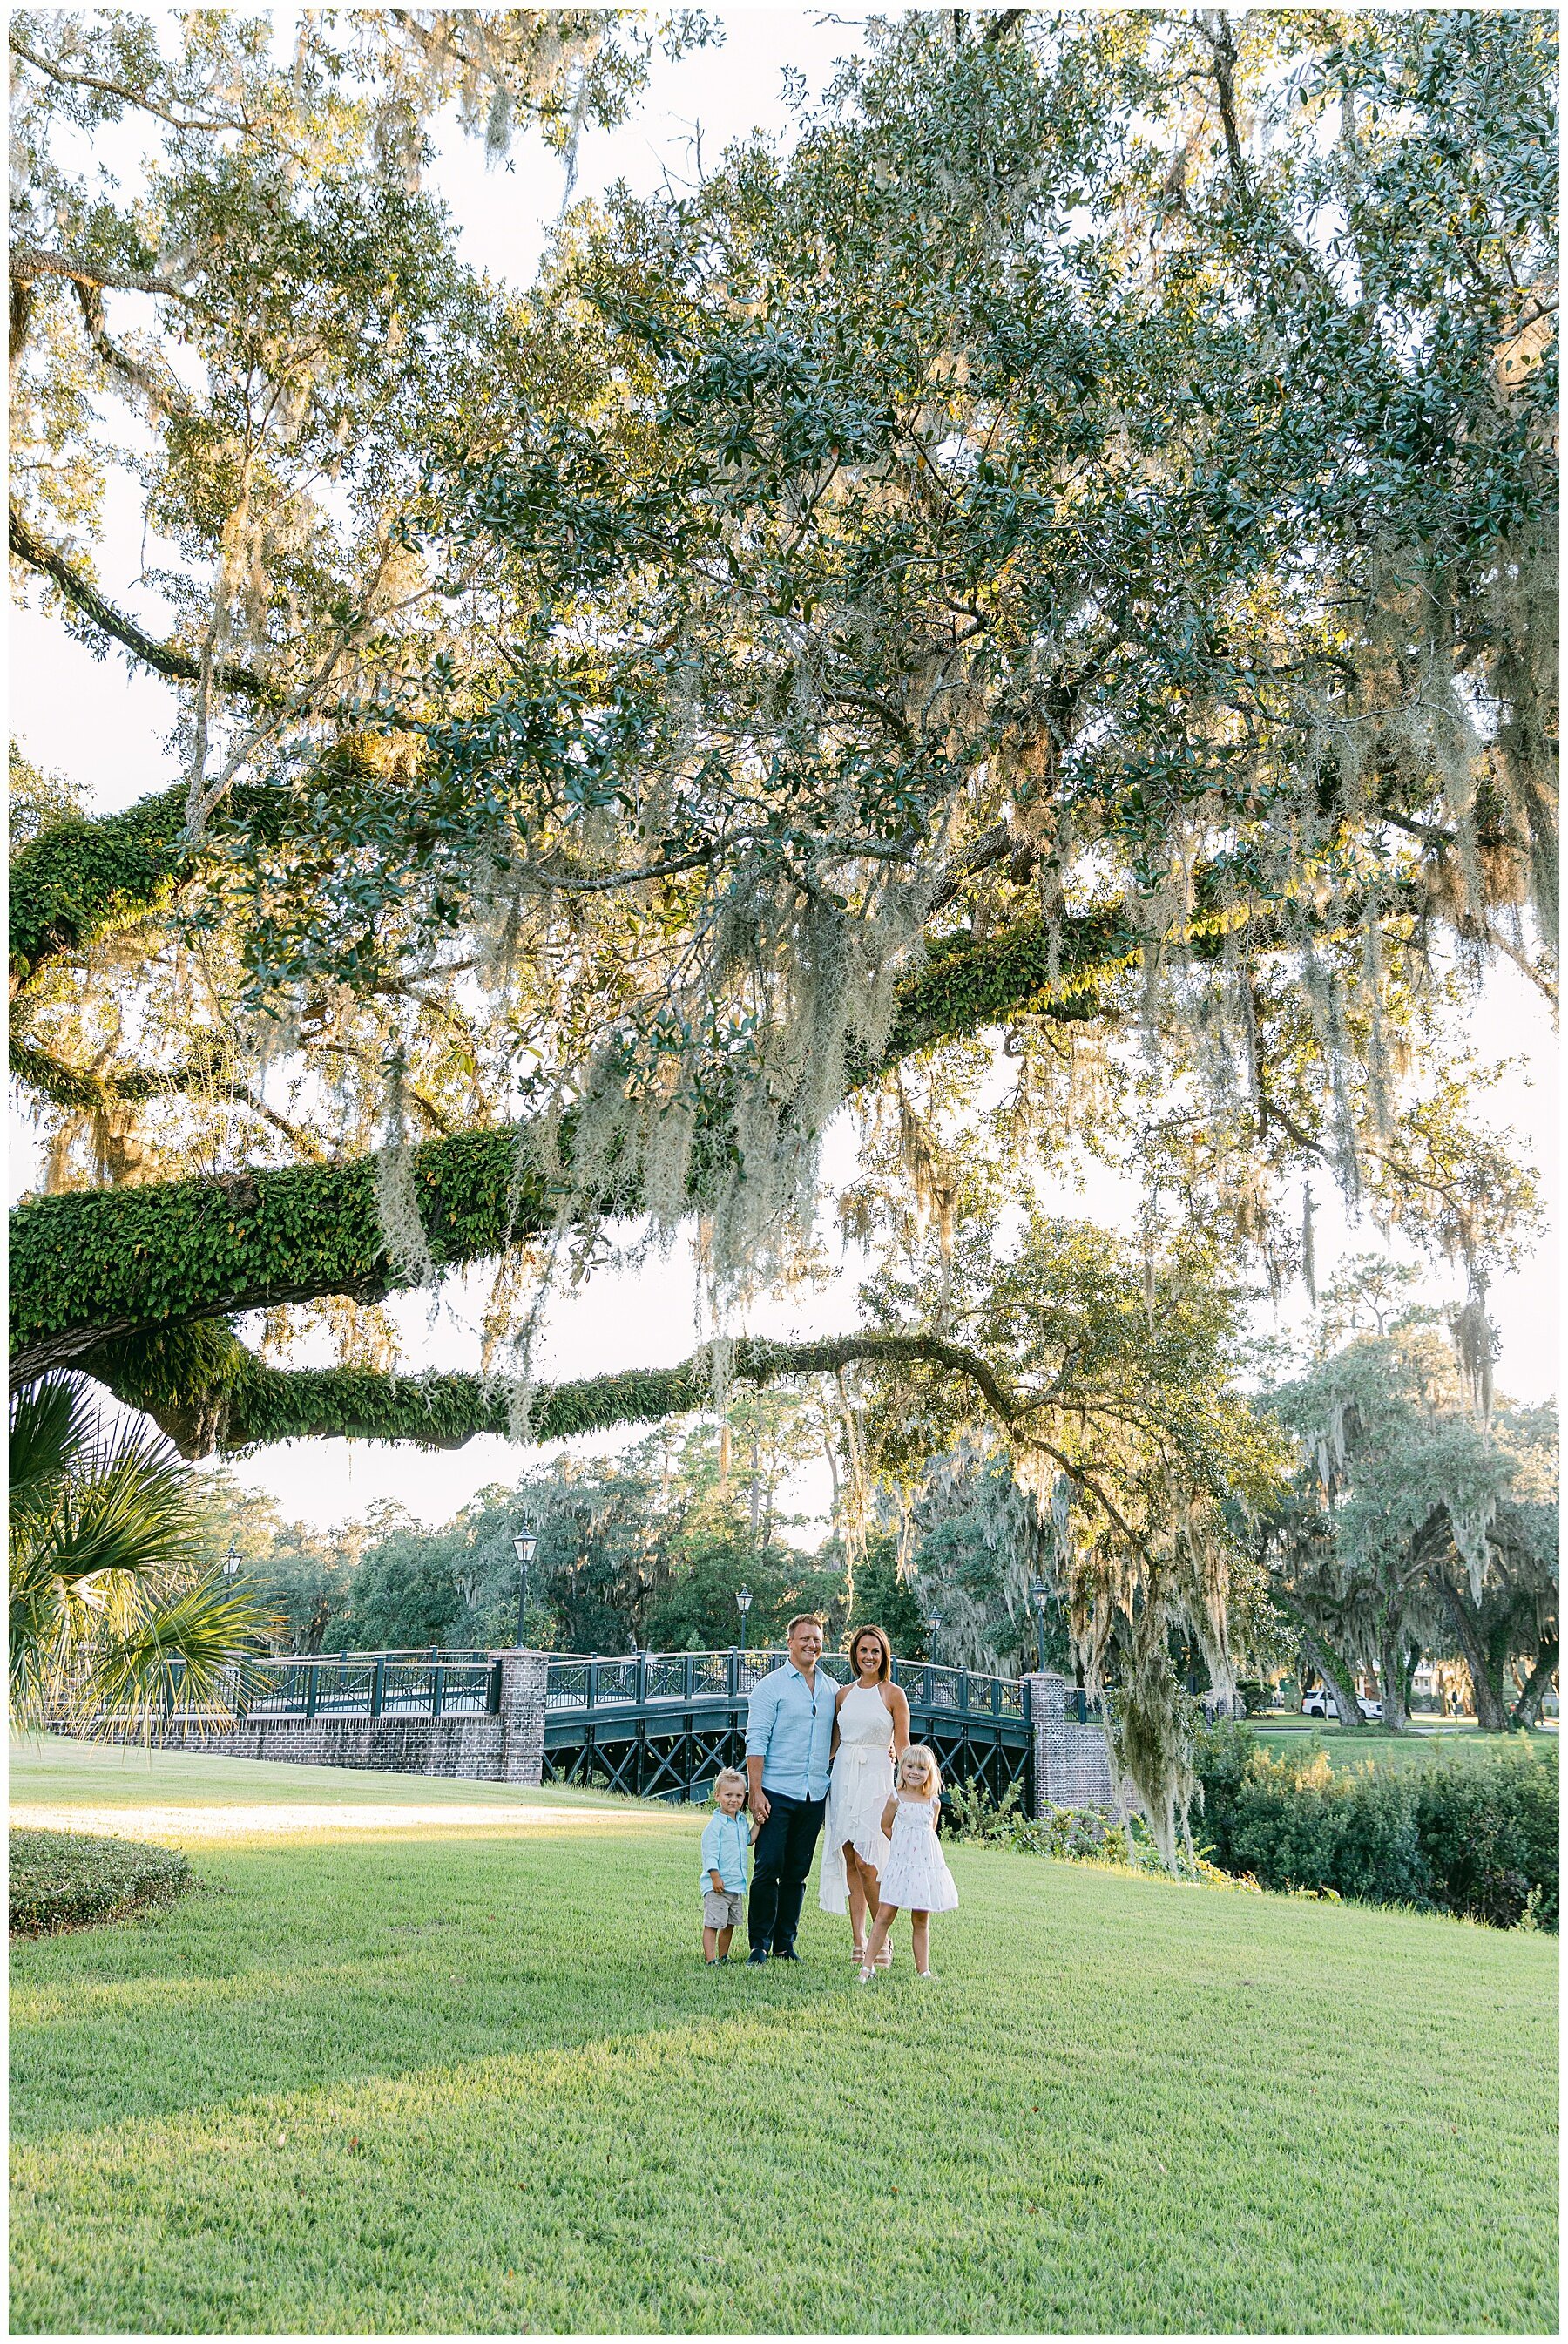 Katherine_Ives_Photography_Mcmillen_Montage_Palmetto_Bluff_30.jpg